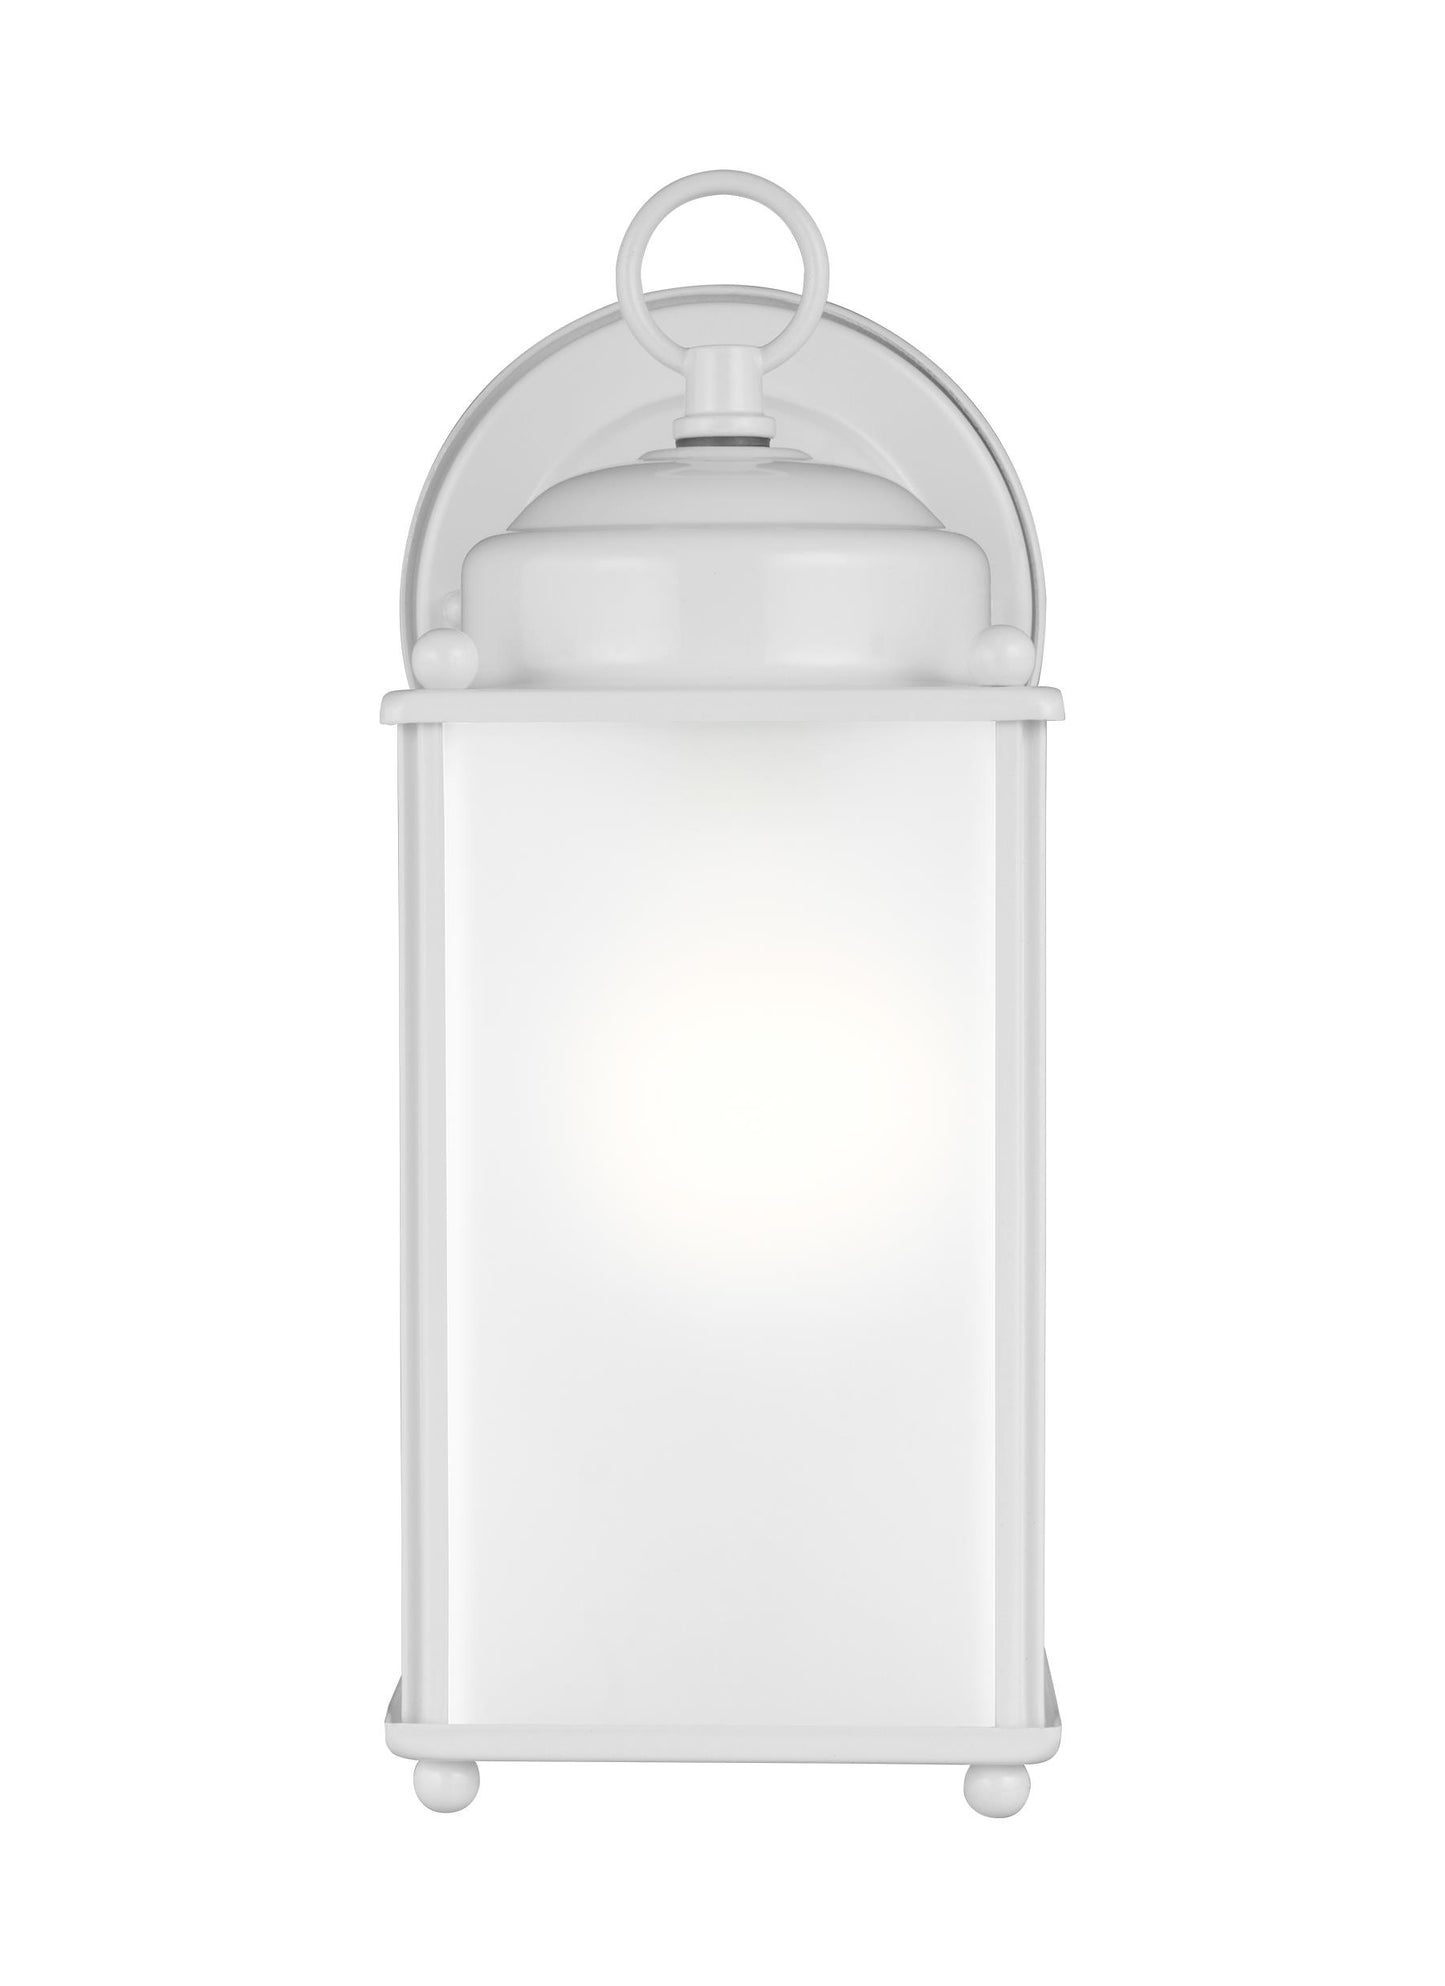 New Castle traditional 1-light outdoor exterior large wall lantern sconce in white finish with satin etched glass panels